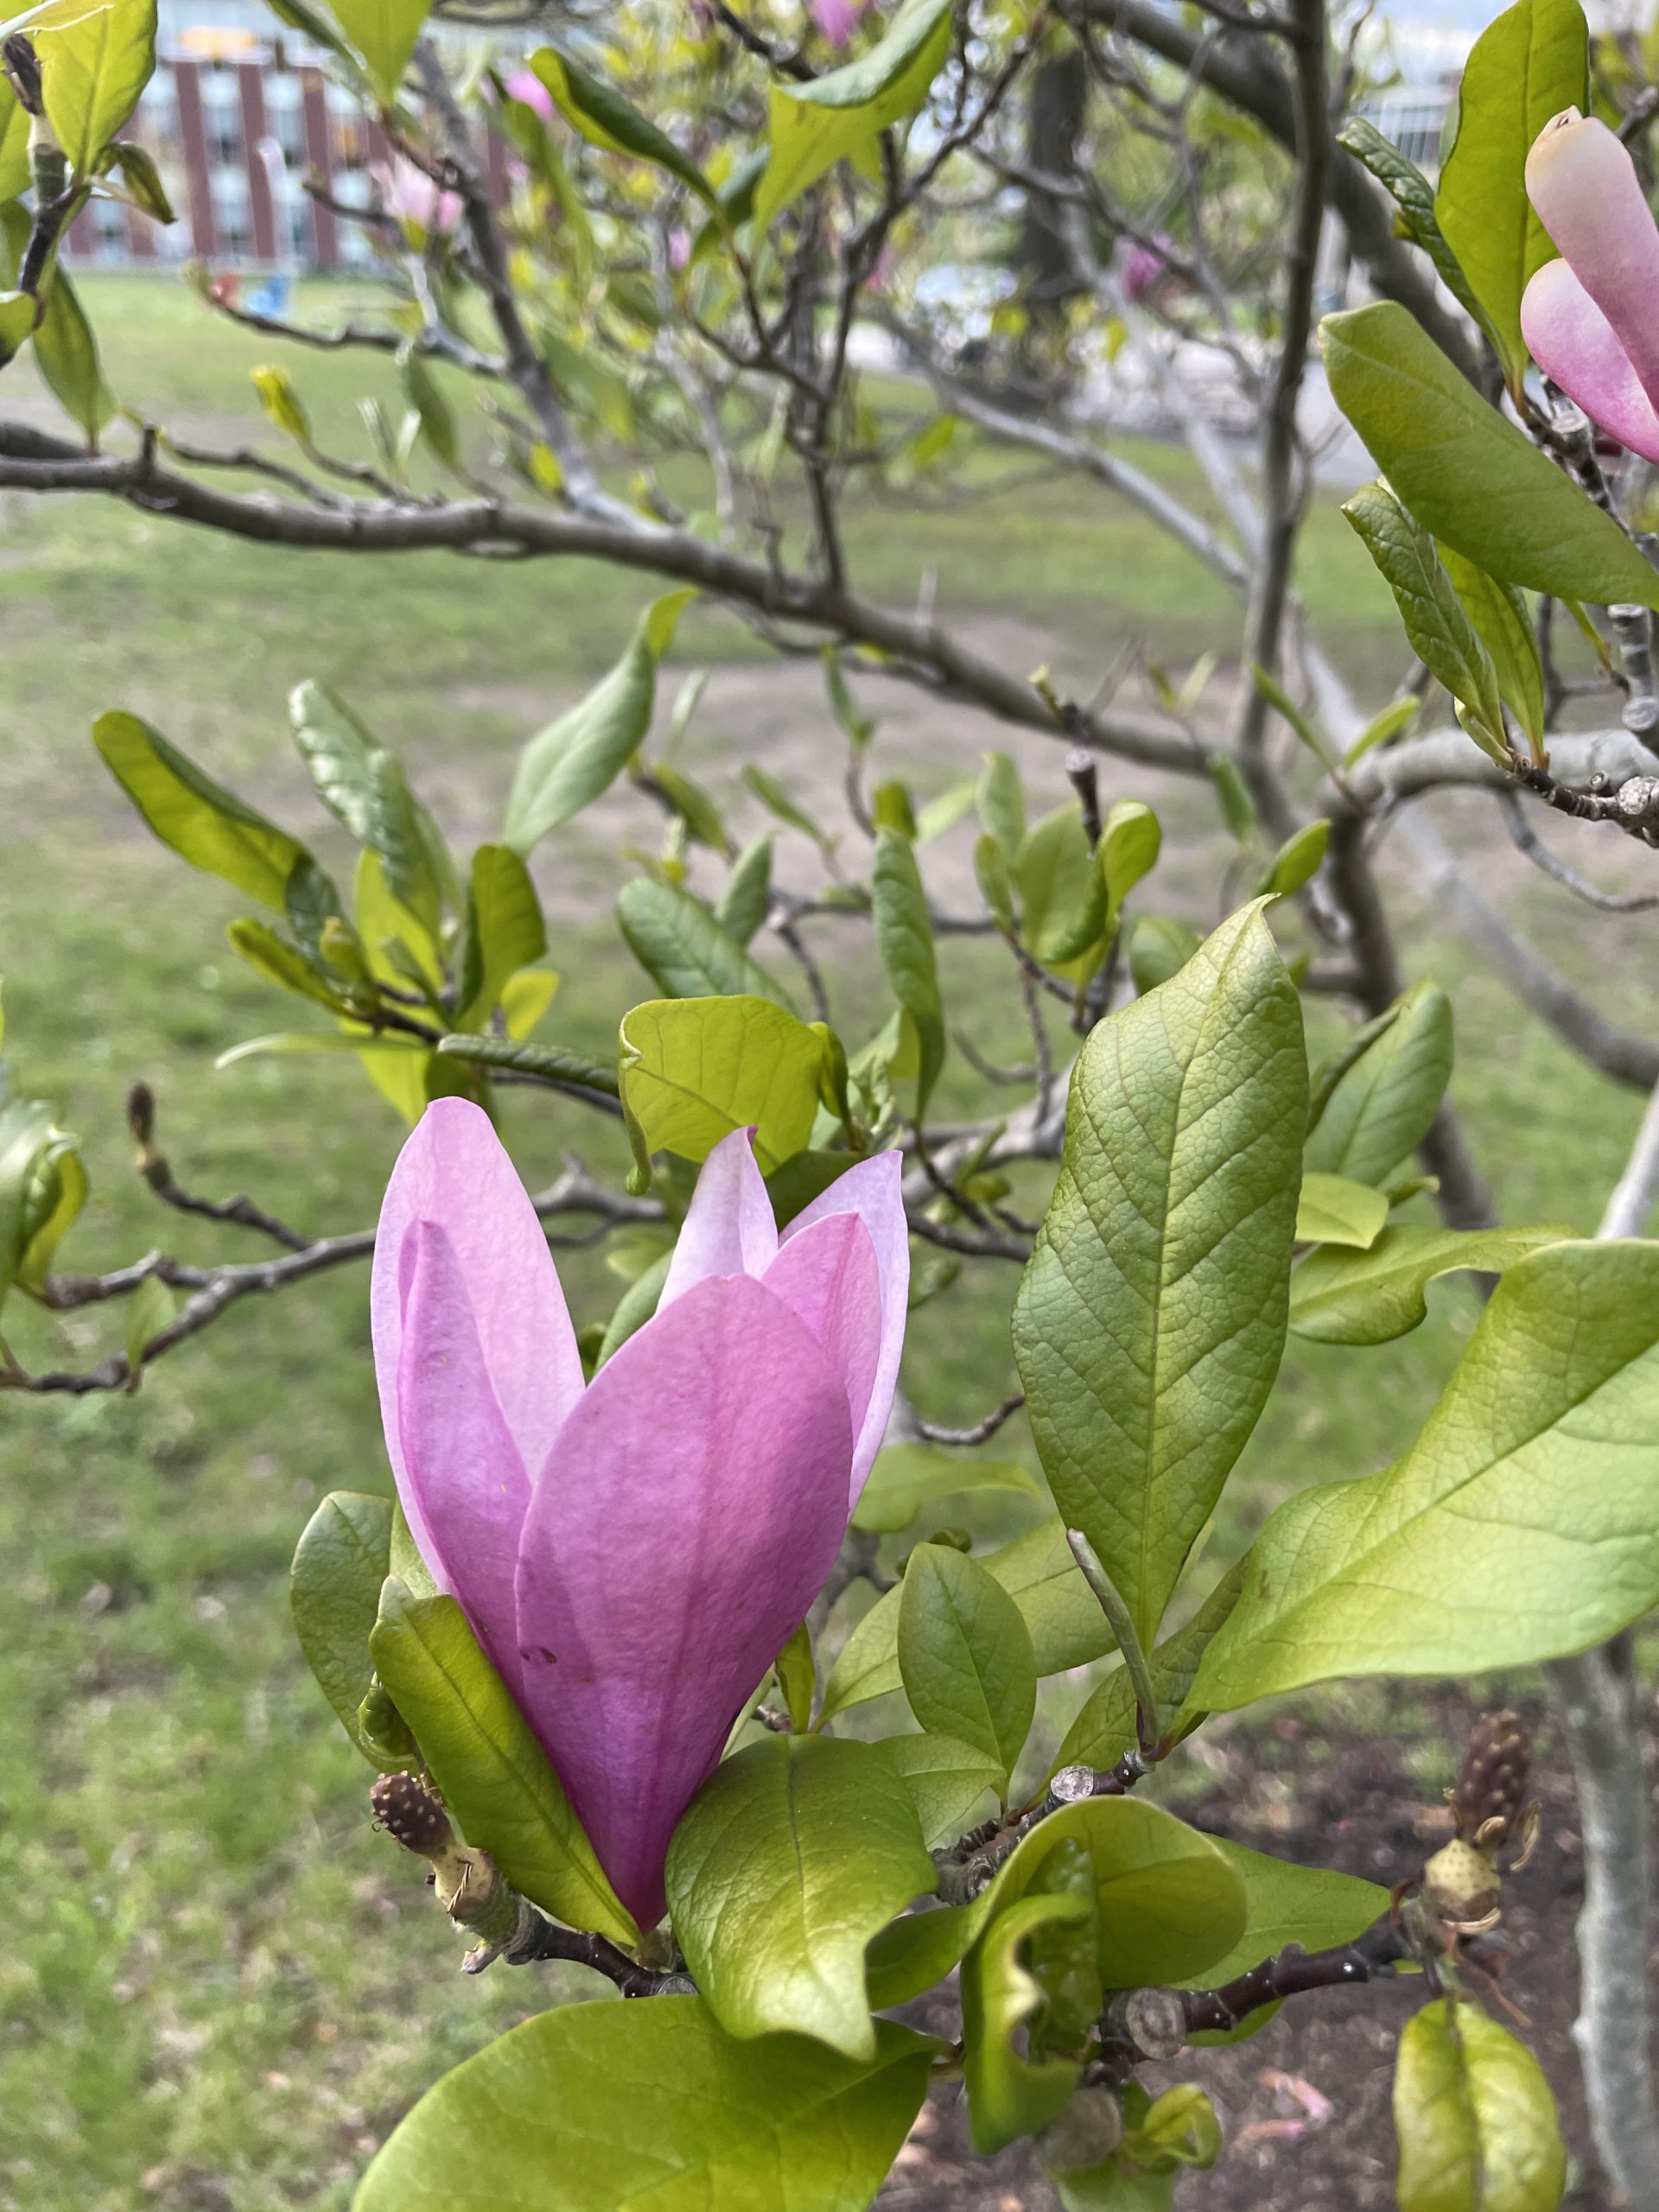 A pink magnolia flower blooms on a small magnolia tree